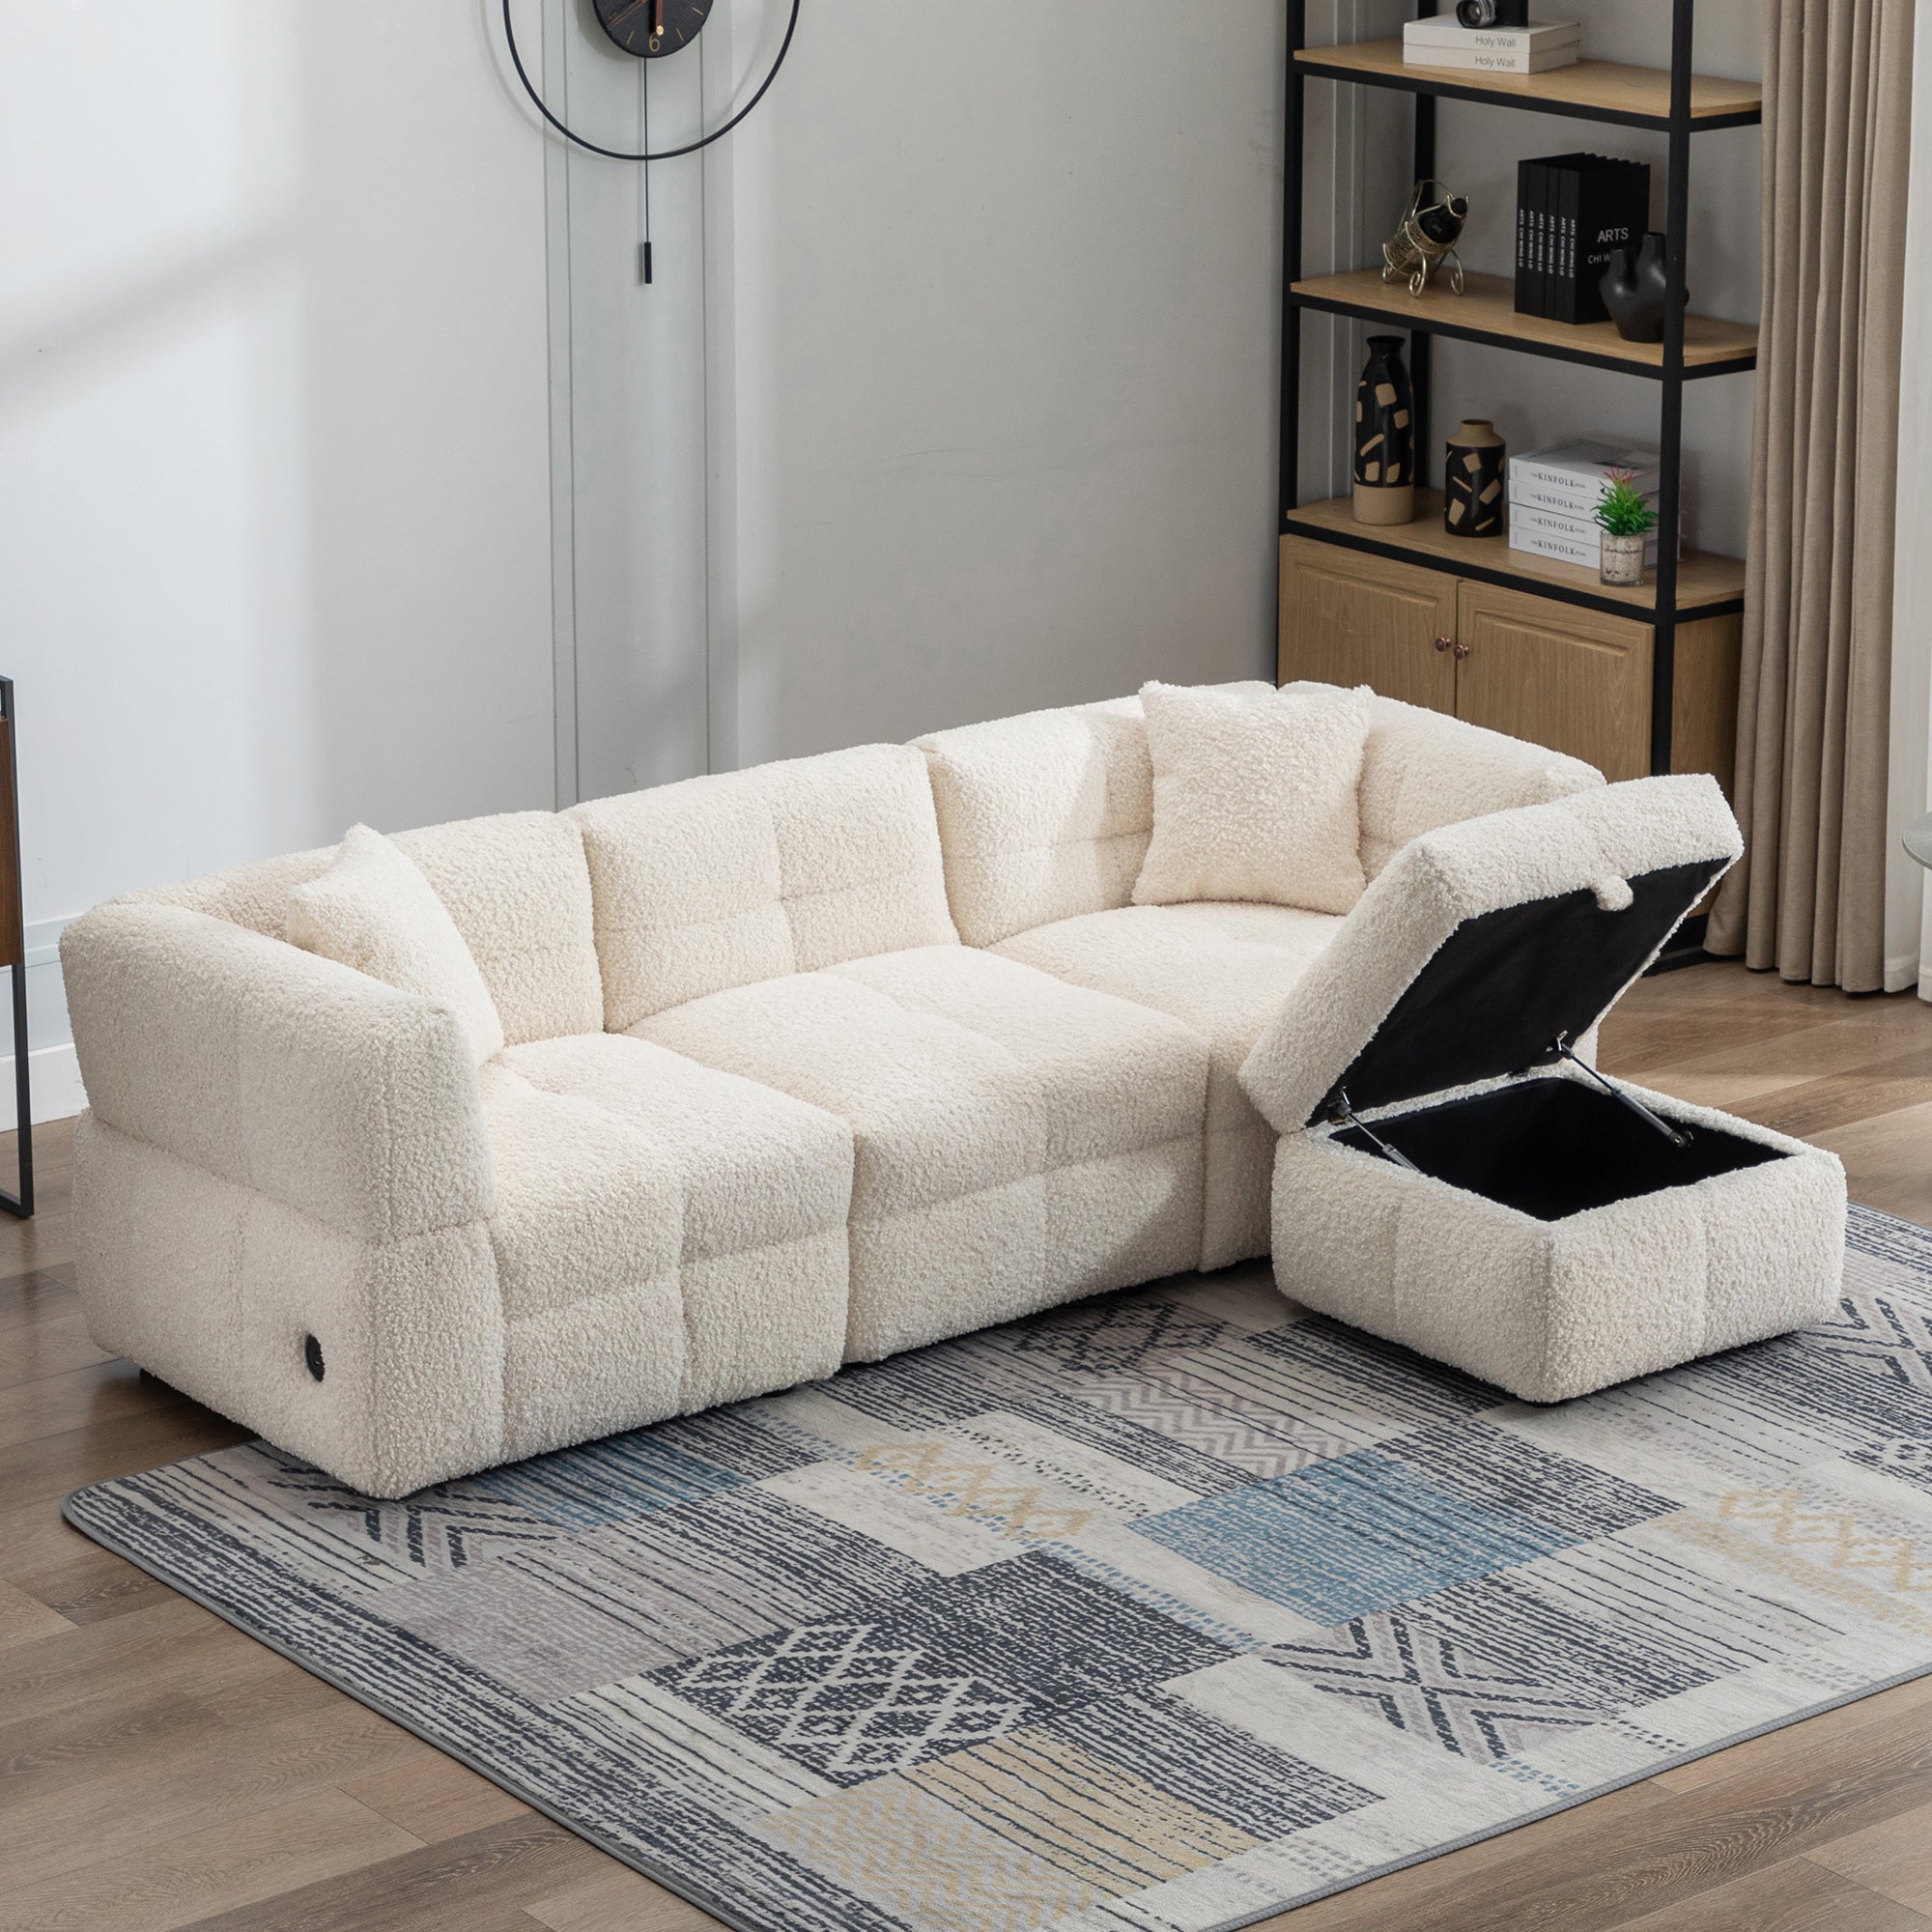 🆓🚛 87.7" Sectional Sofa Cozy Teddy Fleece Fabric Sectional Sofa Couch With 2 USB Ports, Movable Storage Ottoman & Two Lumbar Pillows for Living Room, Creamy White